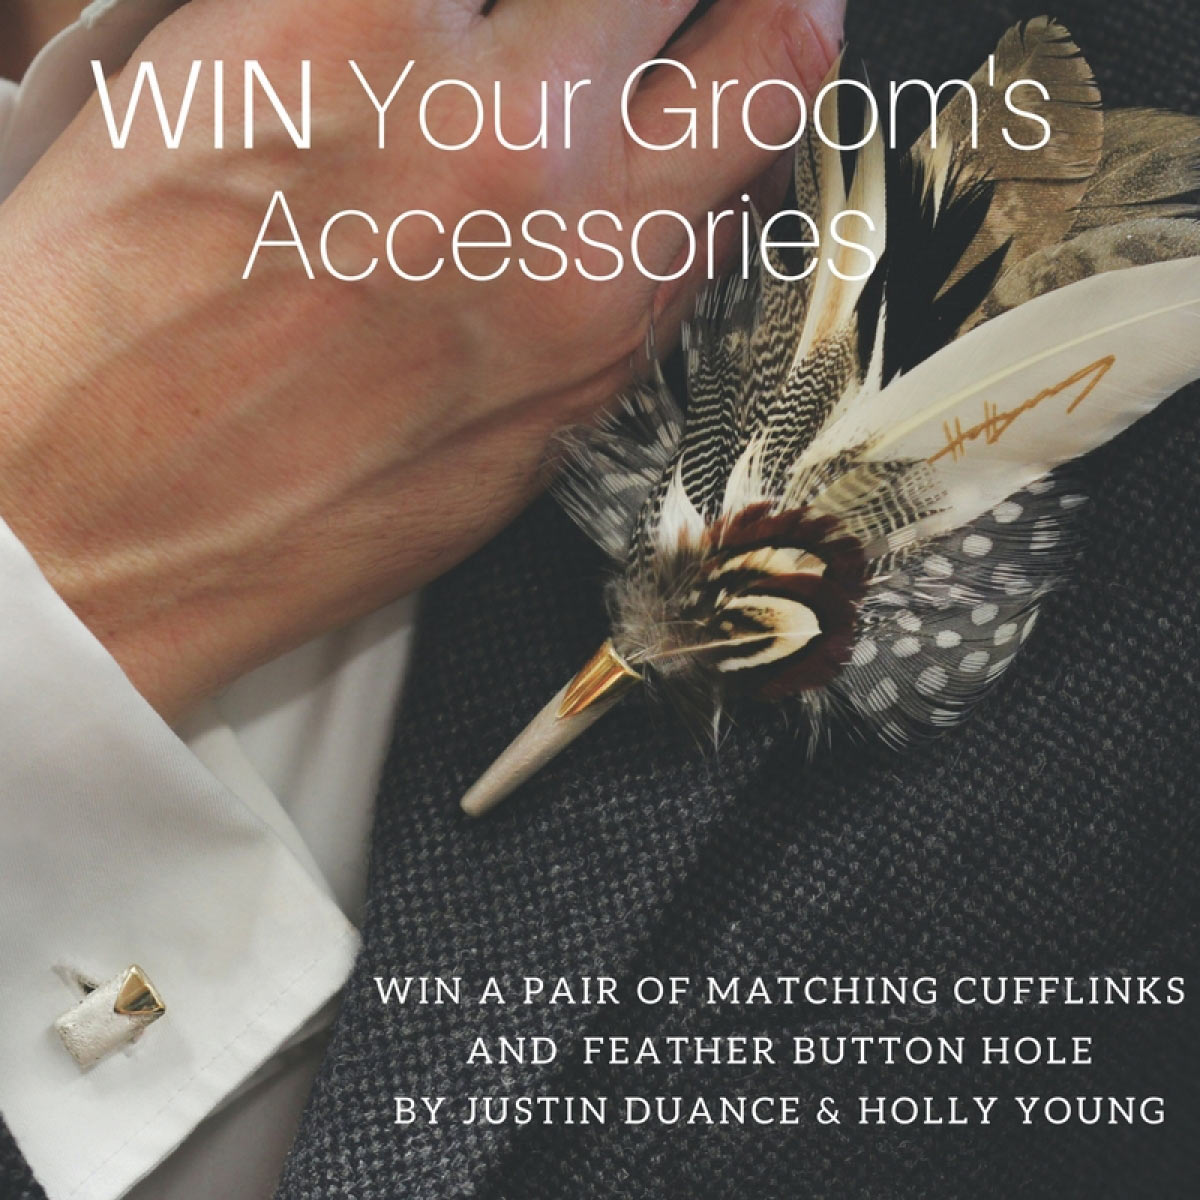 Fabulous competition from Holly Young & Justin Duance